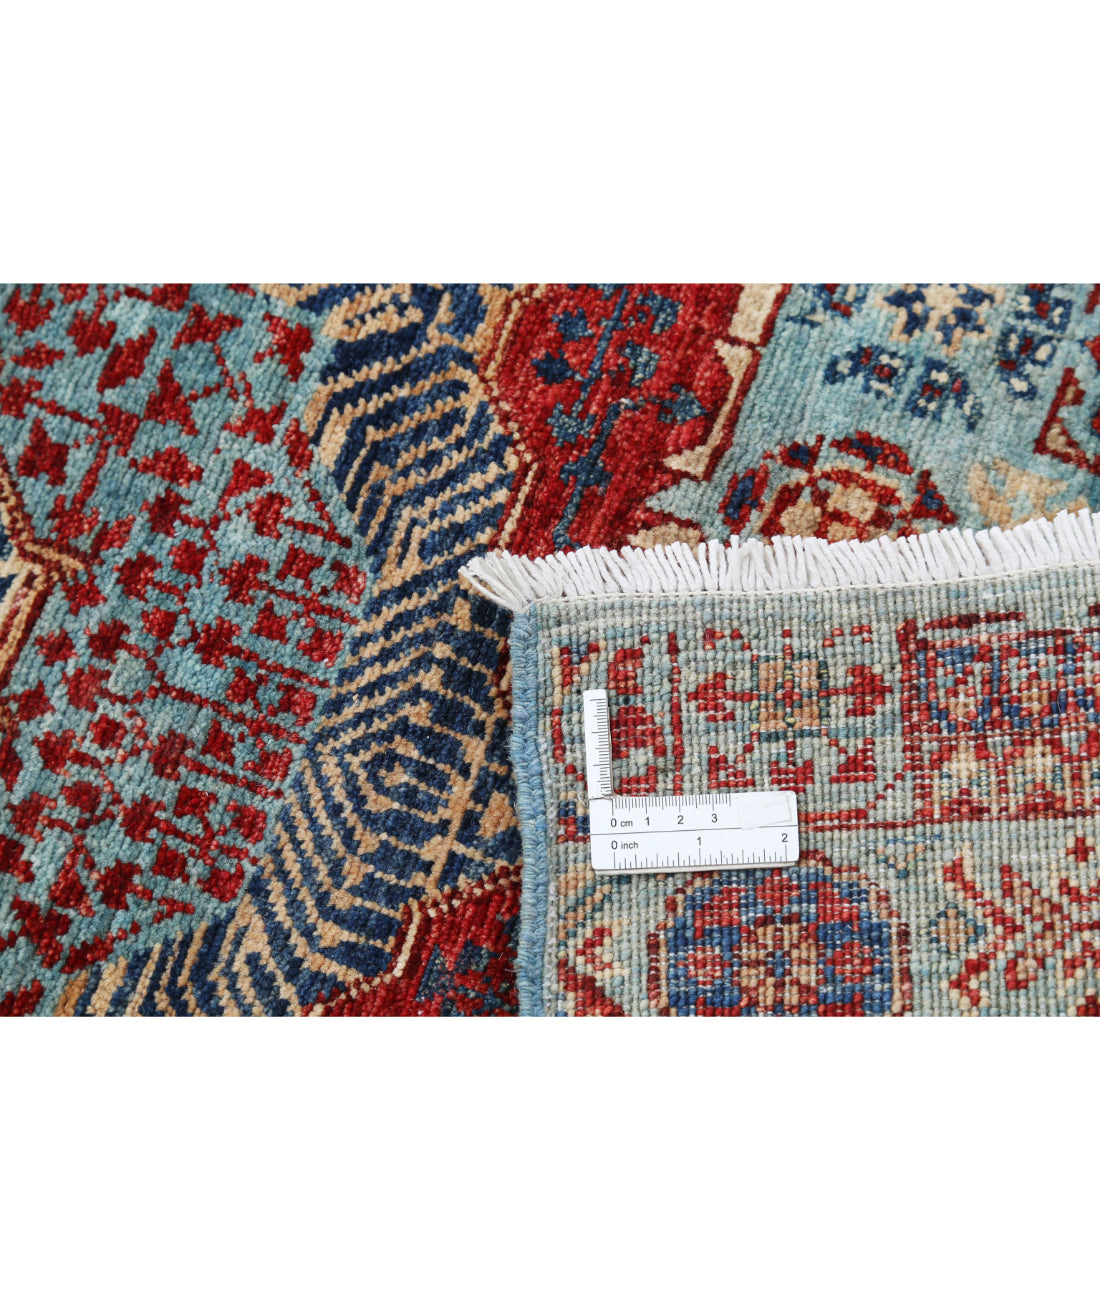 Mamluk 2'5'' X 13'6'' Hand-Knotted Wool Rug 2'5'' x 13'6'' (73 X 405) / Blue / Red